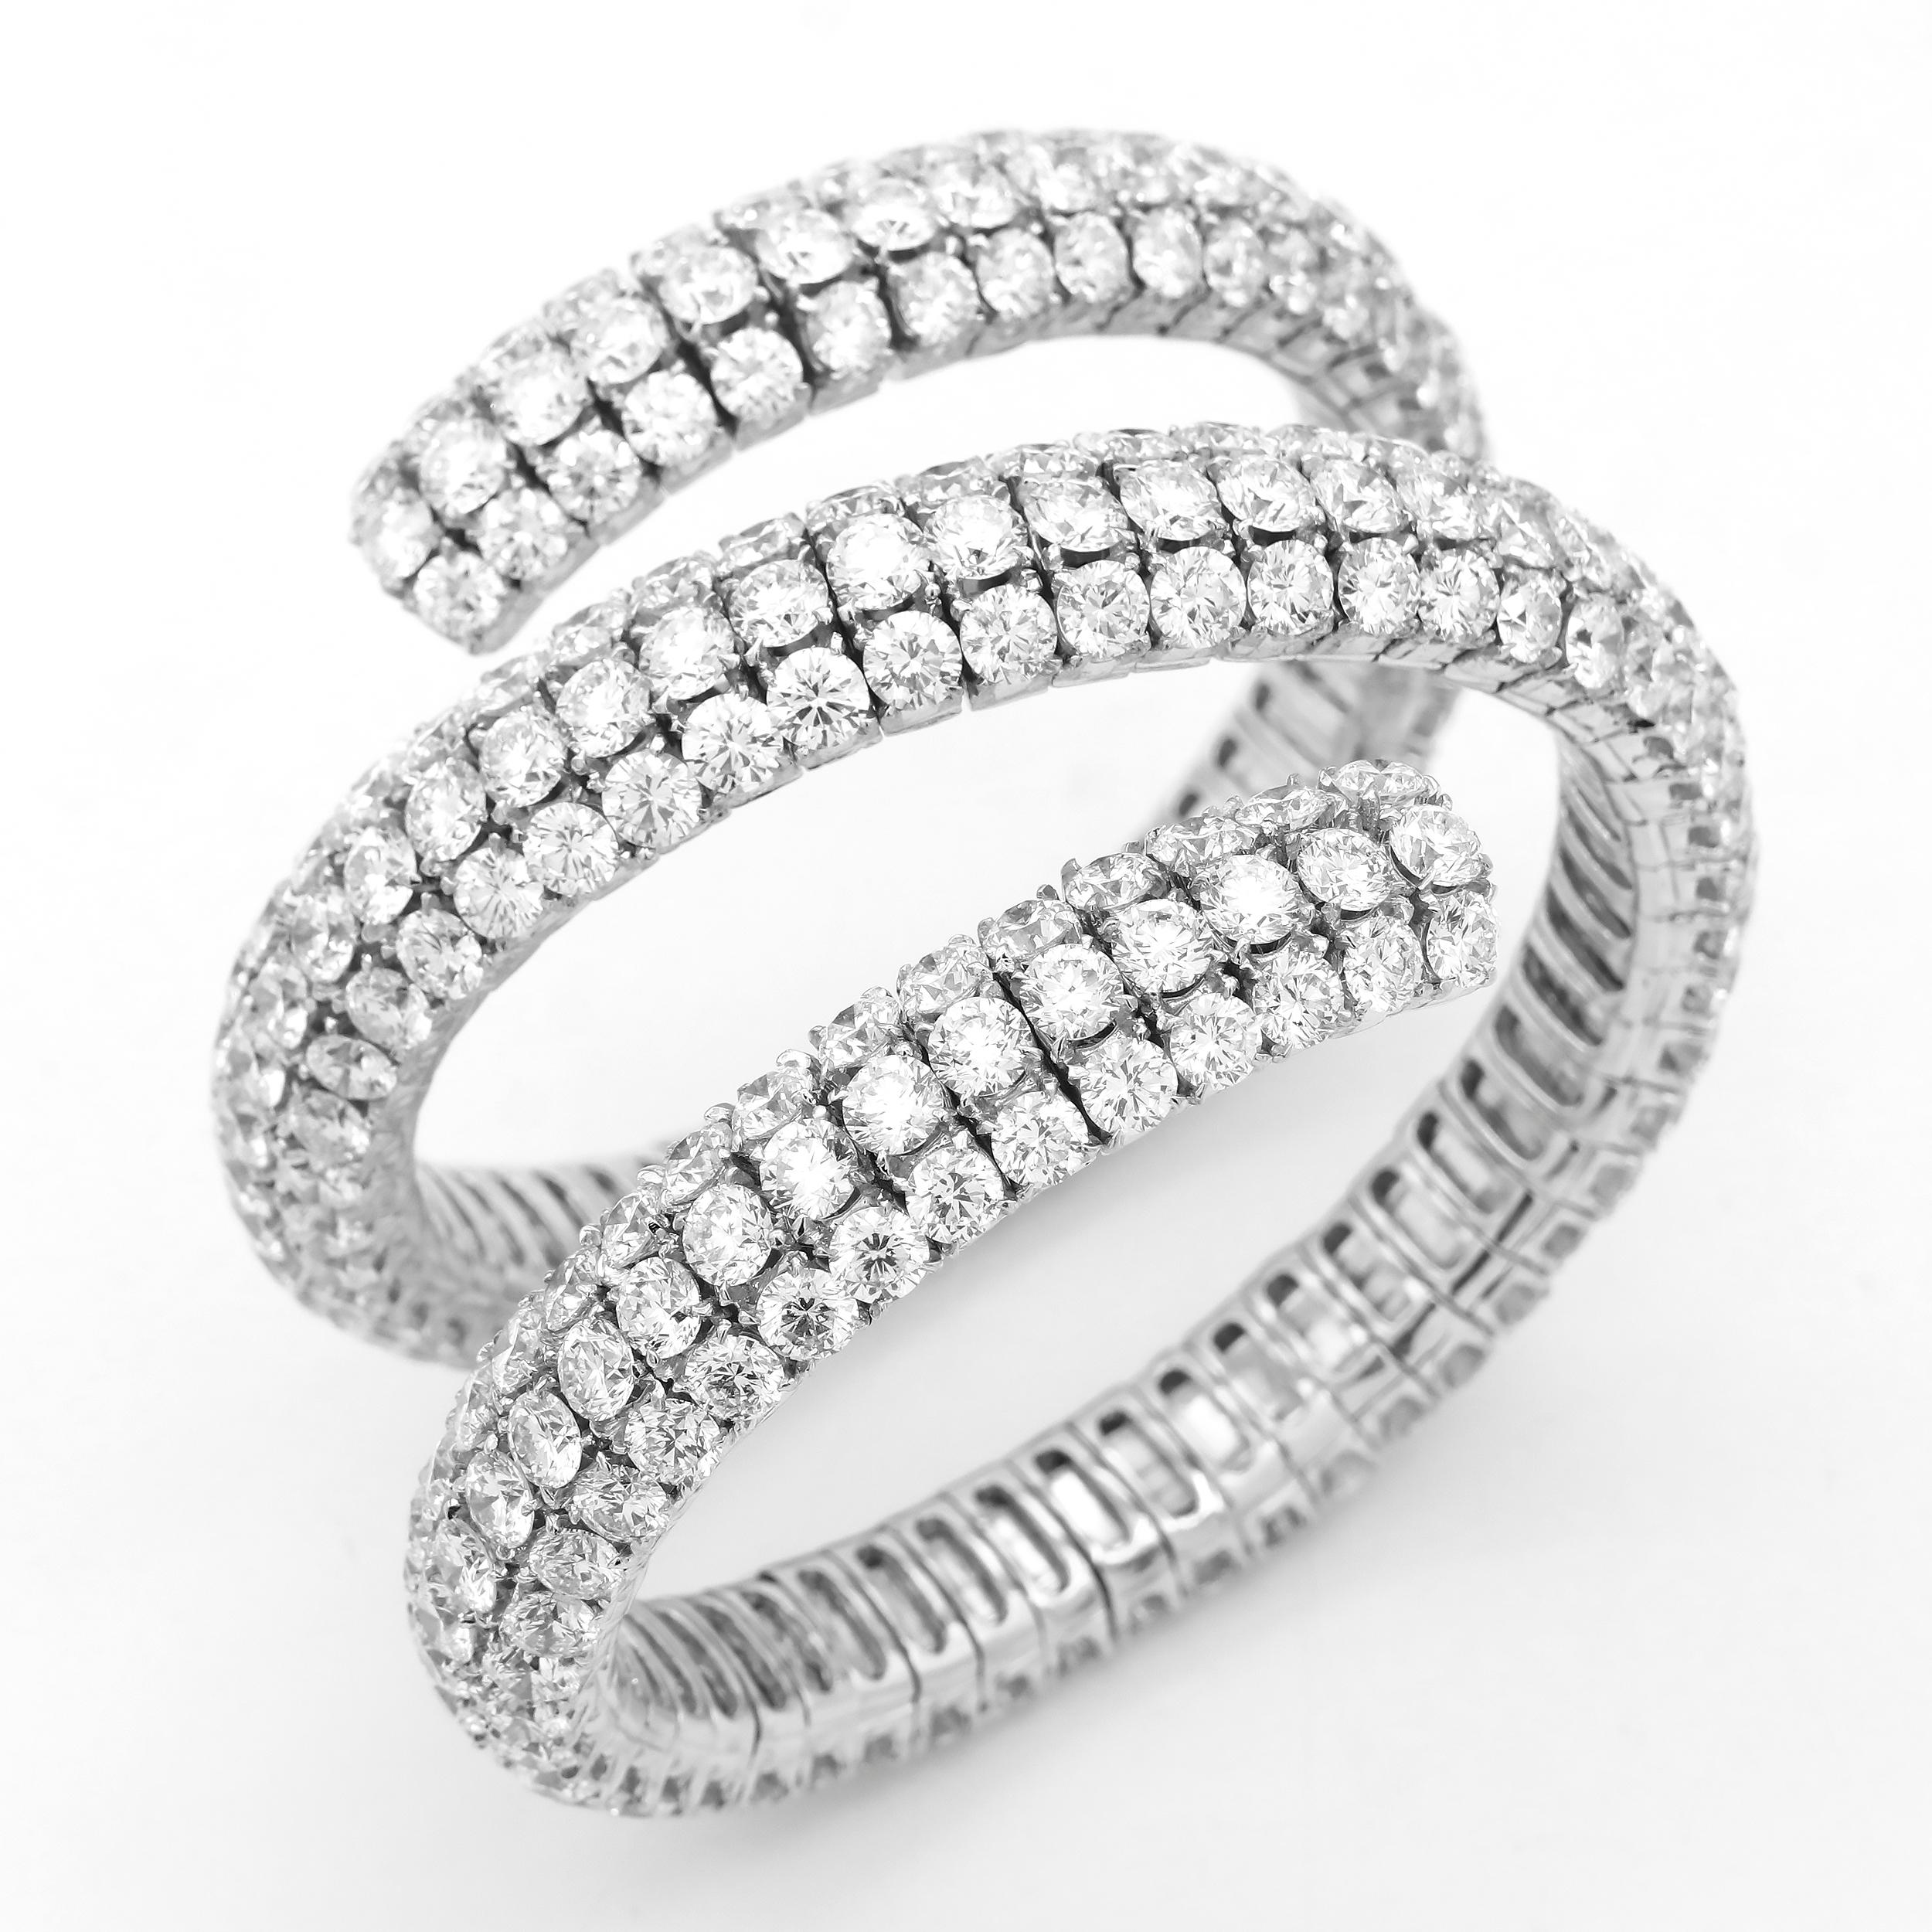 Wrap Around Flexible Bangle with 321 Round white diamonds and about 100 carats. Average color is GH and clarity is VS and Si. Heavy show stopper type of piece. Set in 18k White Gold. 